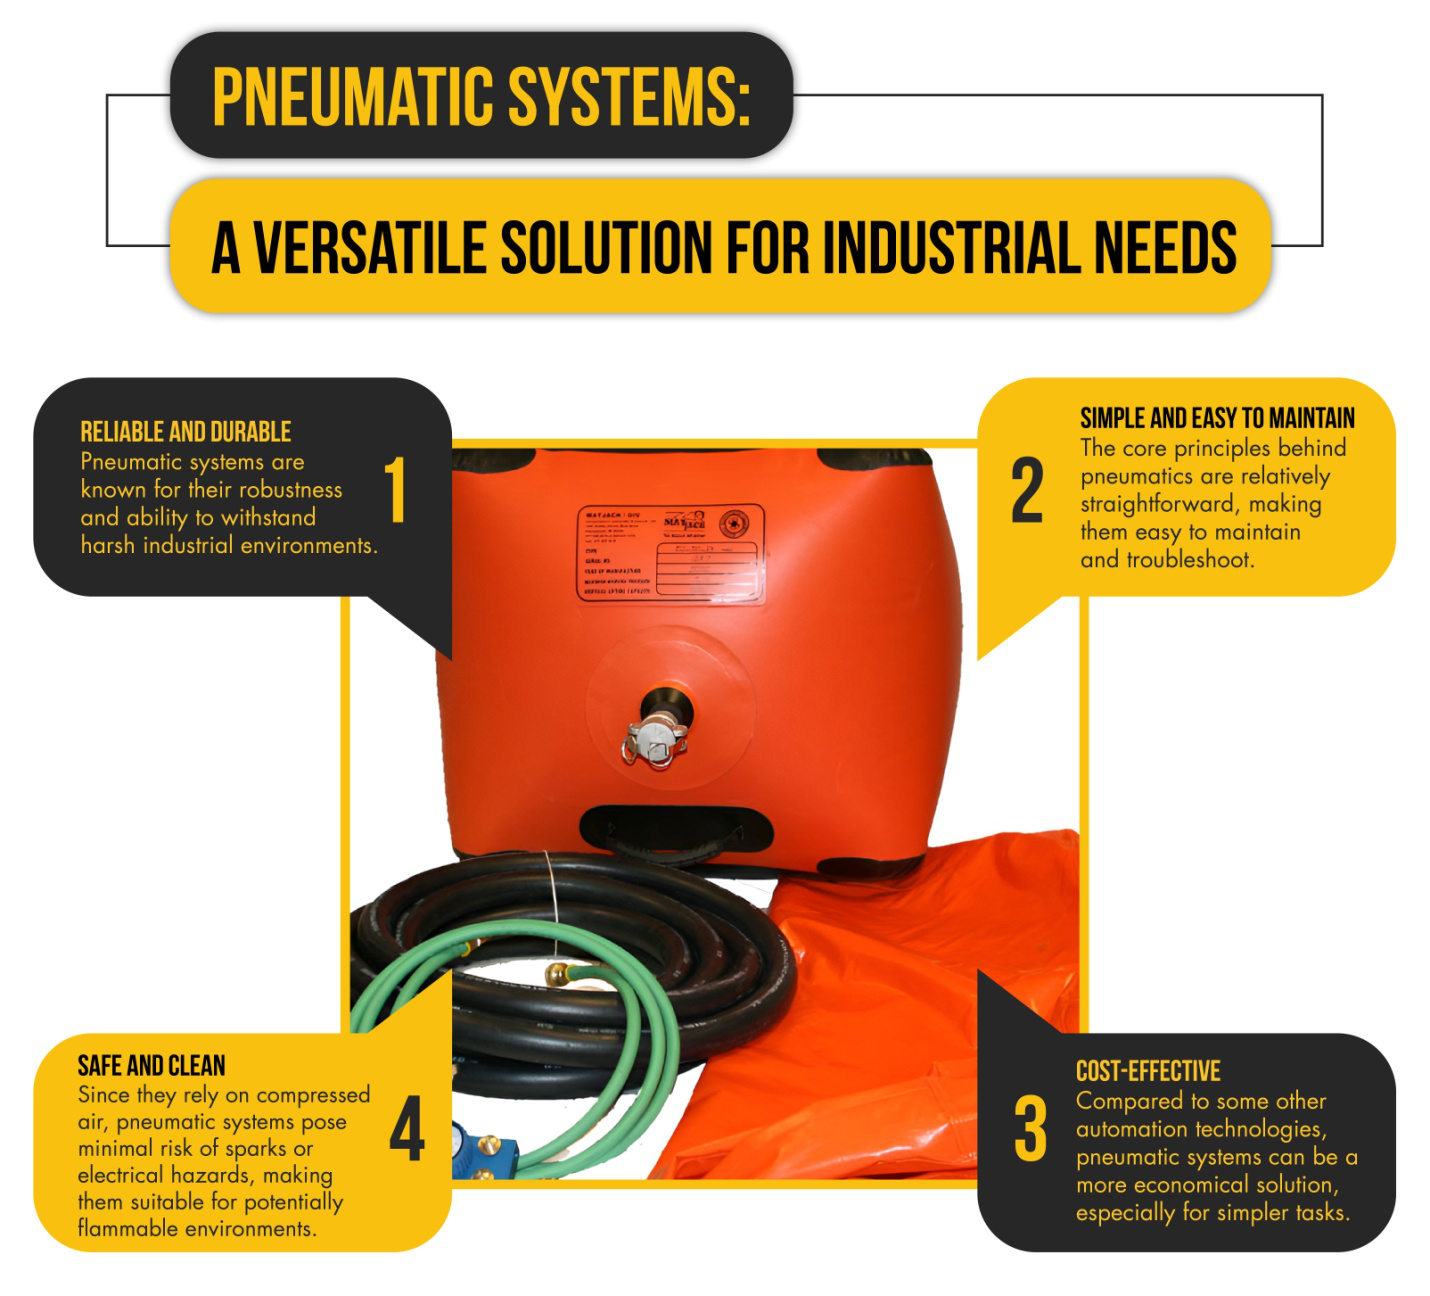 An infographic explaining pneumatic systems